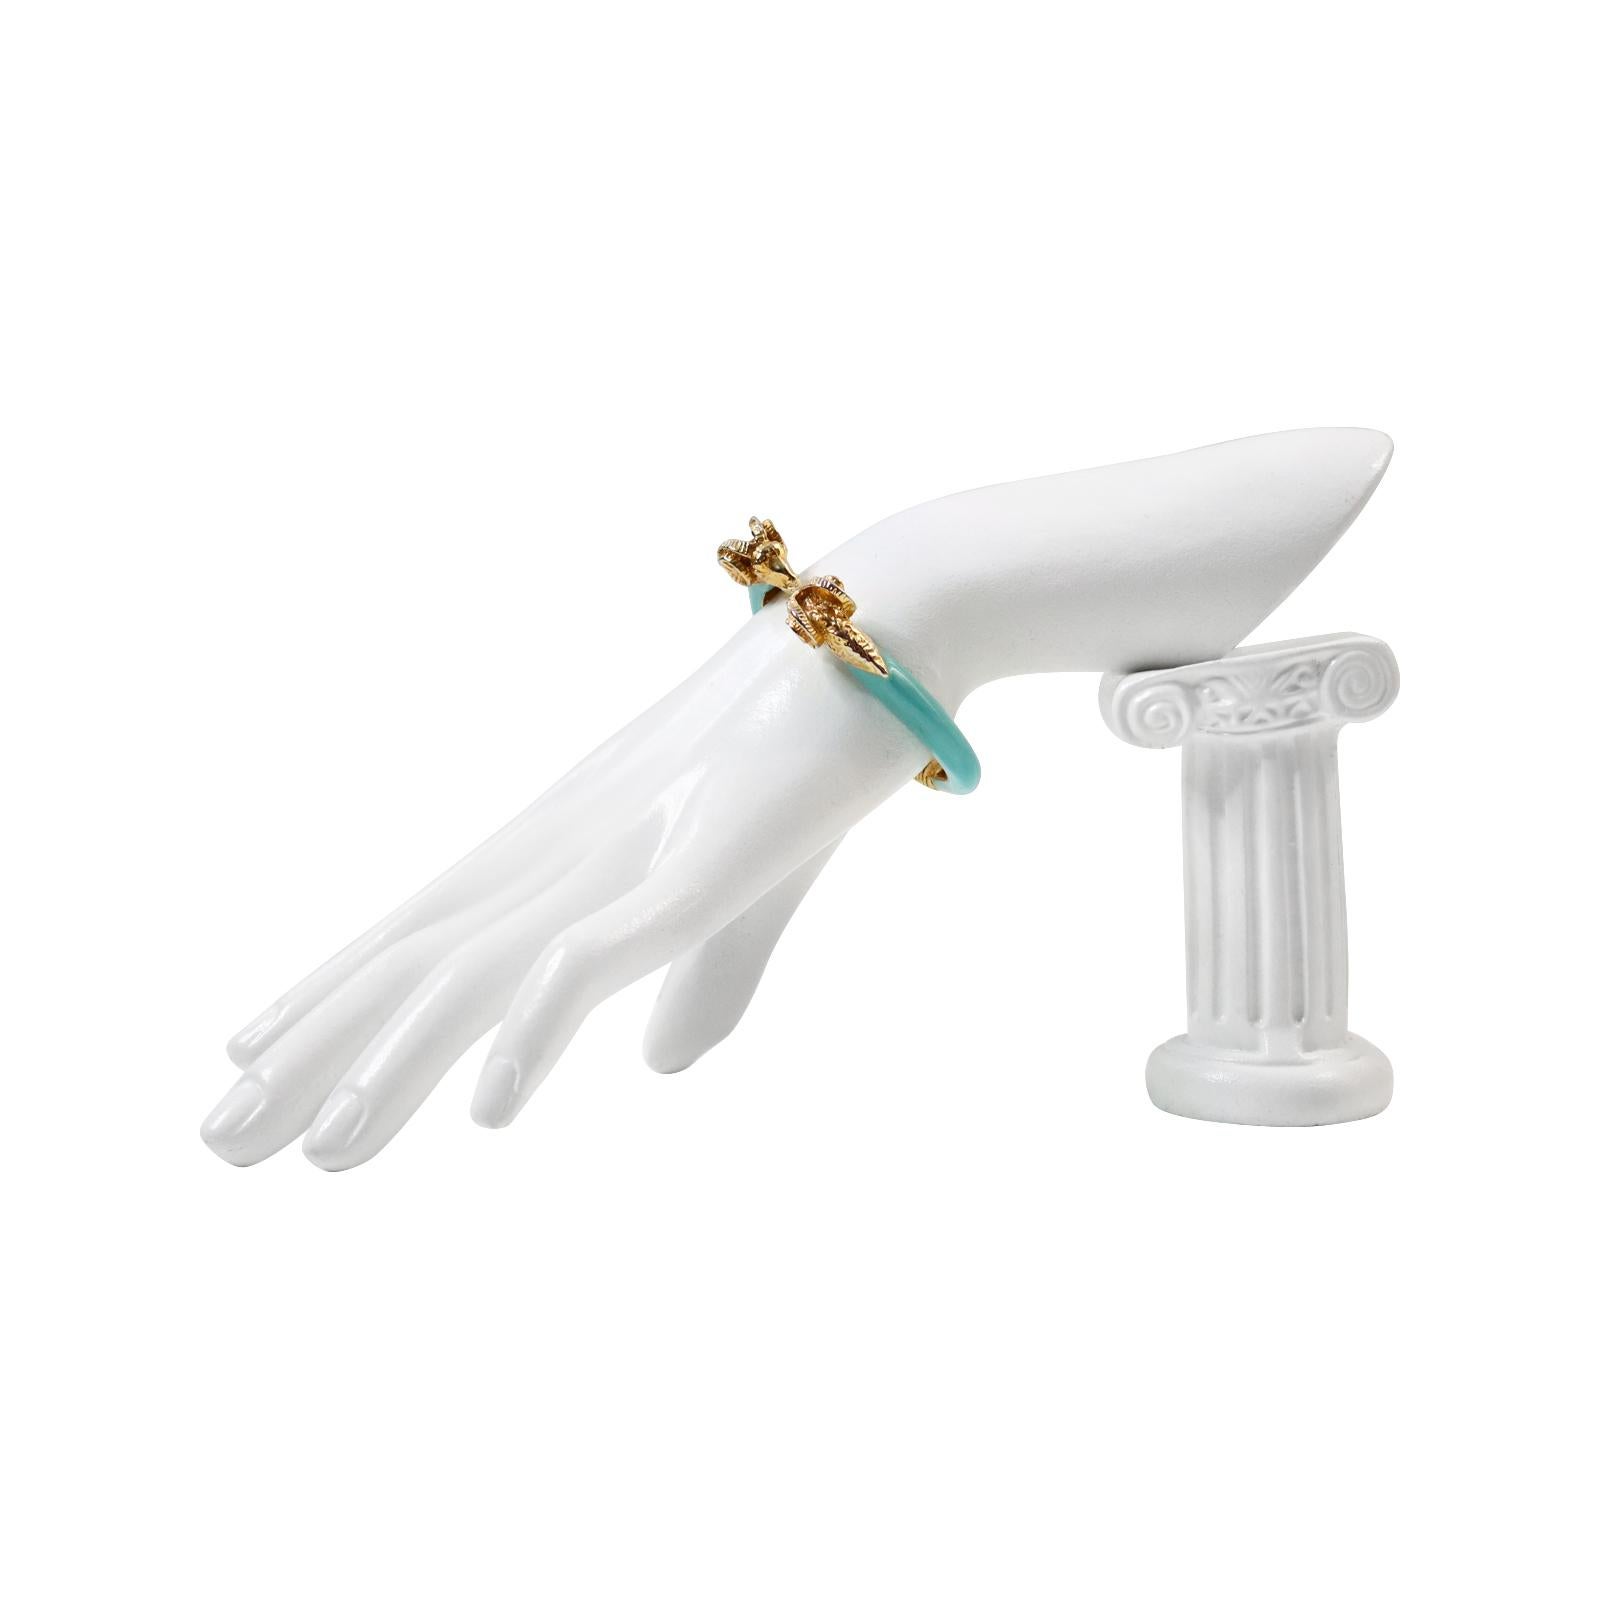 Vintage Donald Stannard Rams Head Bracelet in Turquoise and Gold Circa 1980s In Good Condition For Sale In New York, NY